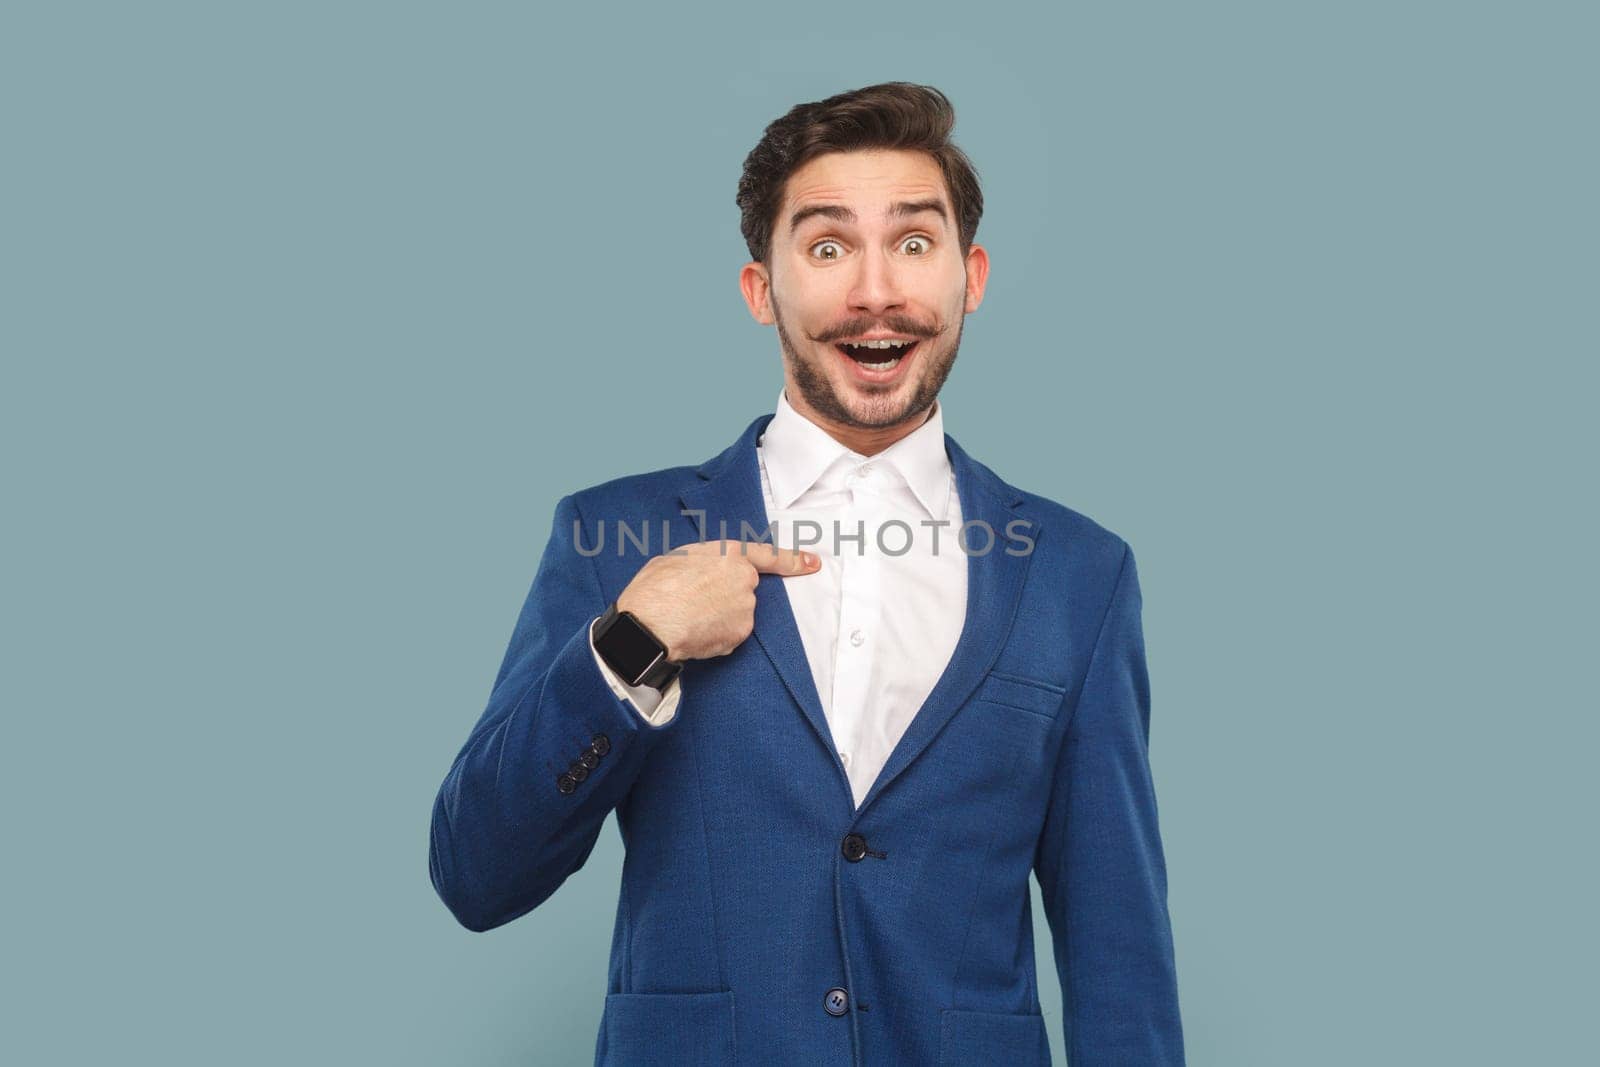 Portrait of excited amazed handsome man with mustache standing pointing at himself with surprised face, wearing official style suit. Indoor studio shot isolated on light blue background.